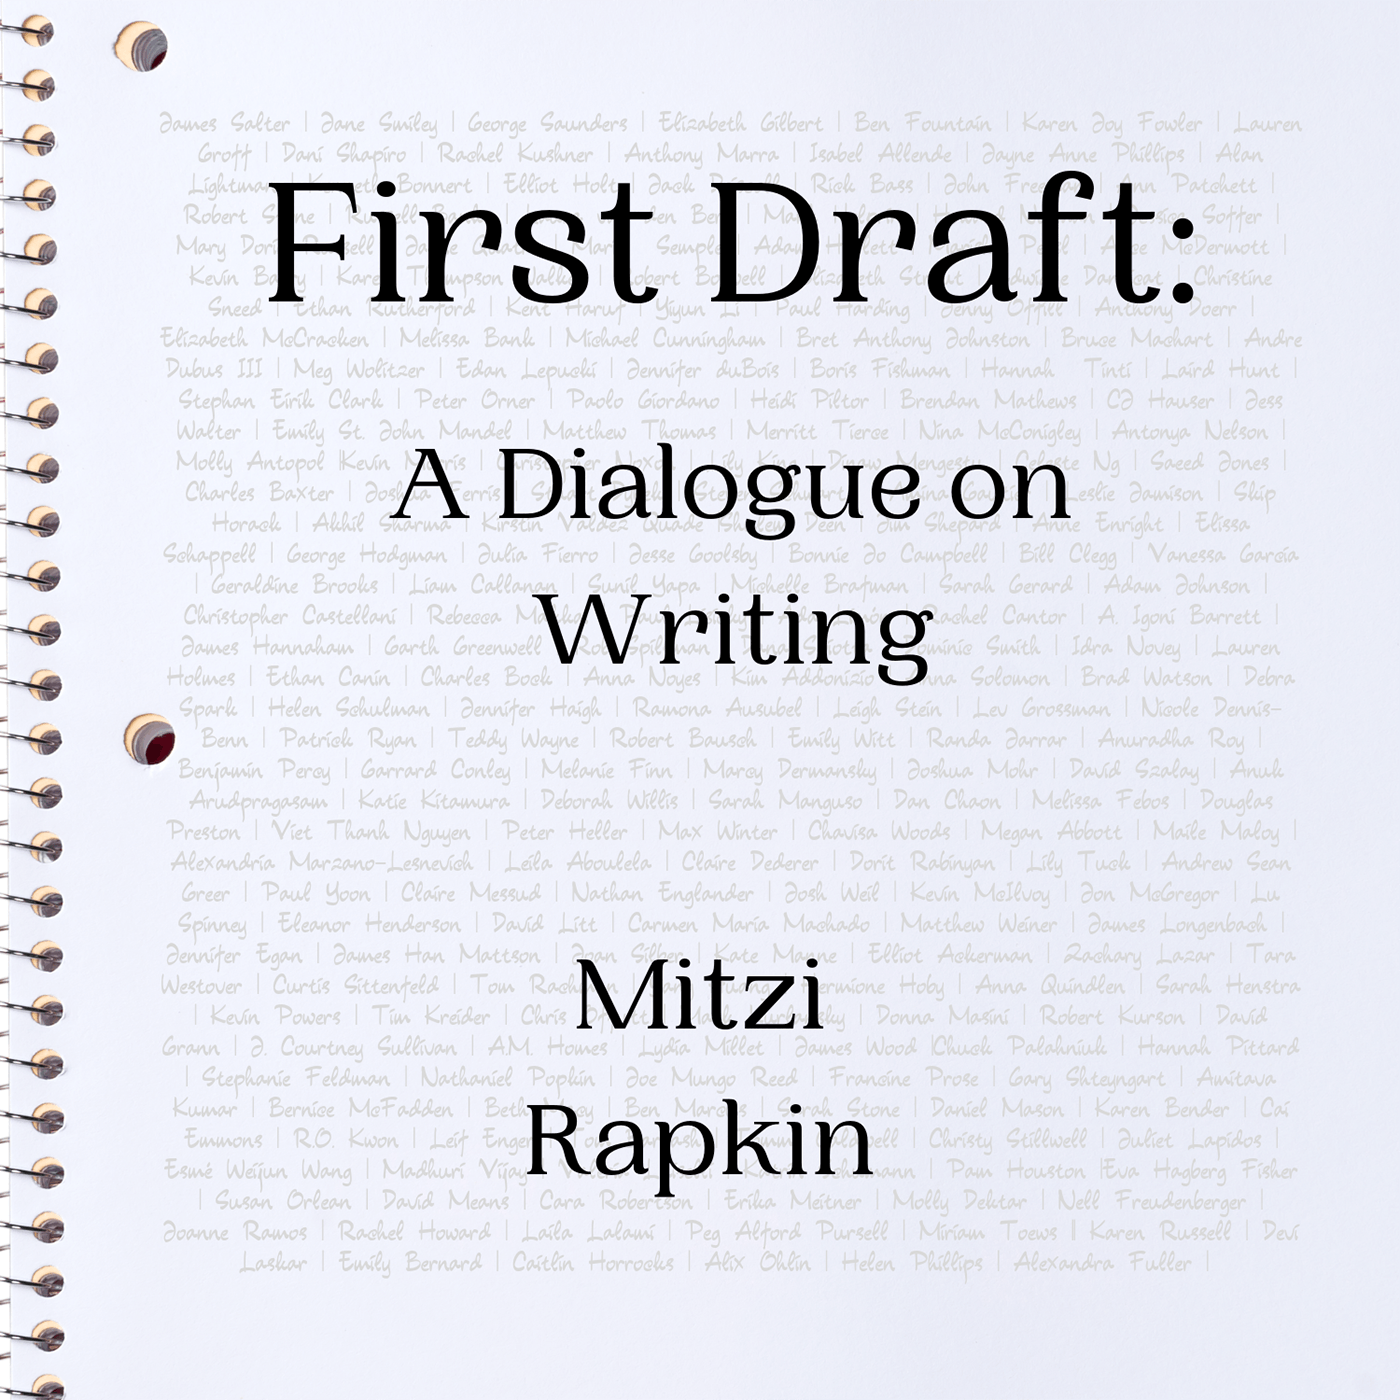 First Draft - Kate Manne